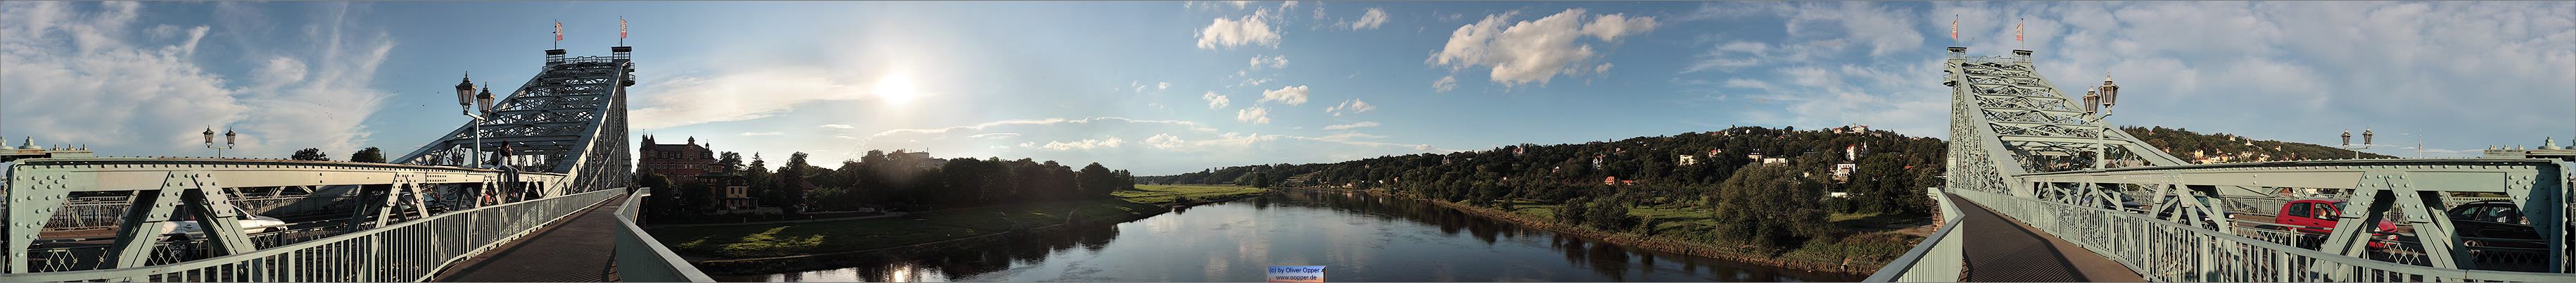 Panorama Dresden - Blaue Wunder - p36 - (c) by Oliver Opper